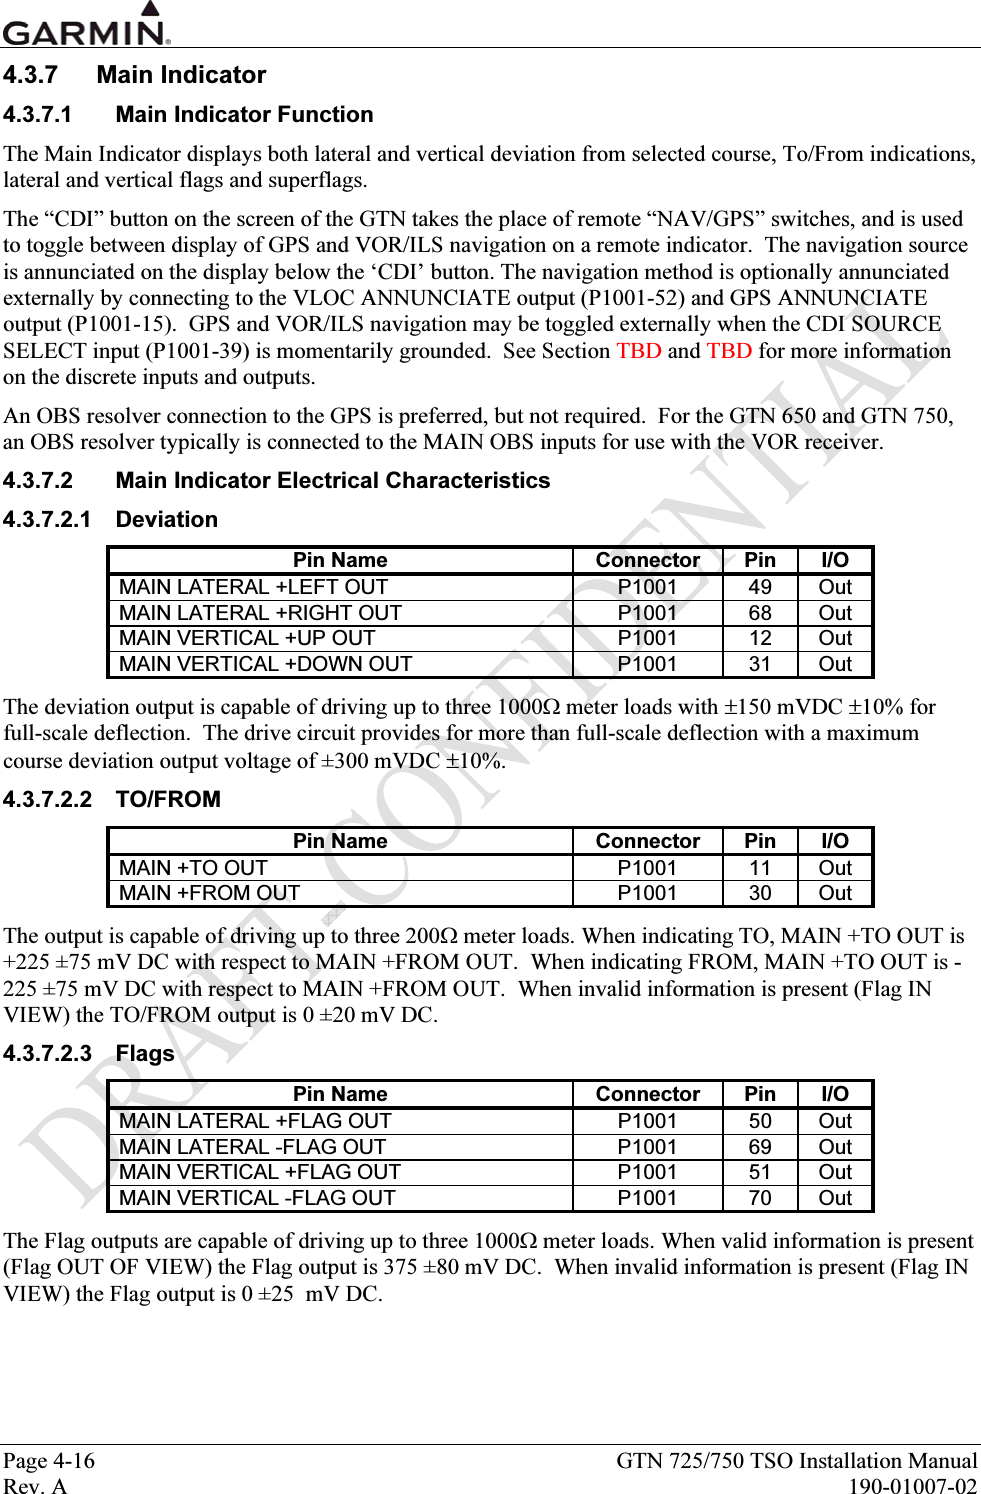  Page 4-16  GTN 725/750 TSO Installation Manual Rev. A  190-01007-02 4.3.7 Main Indicator 4.3.7.1  Main Indicator Function The Main Indicator displays both lateral and vertical deviation from selected course, To/From indications, lateral and vertical flags and superflags. The “CDI” button on the screen of the GTN takes the place of remote “NAV/GPS” switches, and is used to toggle between display of GPS and VOR/ILS navigation on a remote indicator.  The navigation source is annunciated on the display below the ‘CDI’ button. The navigation method is optionally annunciated externally by connecting to the VLOC ANNUNCIATE output (P1001-52) and GPS ANNUNCIATE output (P1001-15).  GPS and VOR/ILS navigation may be toggled externally when the CDI SOURCE SELECT input (P1001-39) is momentarily grounded.  See Section TBD and TBD for more information on the discrete inputs and outputs. An OBS resolver connection to the GPS is preferred, but not required.  For the GTN 650 and GTN 750, an OBS resolver typically is connected to the MAIN OBS inputs for use with the VOR receiver. 4.3.7.2  Main Indicator Electrical Characteristics 4.3.7.2.1 Deviation Pin Name  Connector  Pin  I/O MAIN LATERAL +LEFT OUT  P1001  49  Out MAIN LATERAL +RIGHT OUT  P1001  68  Out MAIN VERTICAL +UP OUT  P1001  12  Out MAIN VERTICAL +DOWN OUT  P1001  31  Out The deviation output is capable of driving up to three 1000Ω meter loads with ±150 mVDC ±10% for full-scale deflection.  The drive circuit provides for more than full-scale deflection with a maximum course deviation output voltage of ±300 mVDC ±10%. 4.3.7.2.2 TO/FROM Pin Name  Connector  Pin  I/O MAIN +TO OUT  P1001  11  Out MAIN +FROM OUT  P1001  30  Out The output is capable of driving up to three 200Ω meter loads. When indicating TO, MAIN +TO OUT is +225 ±75 mV DC with respect to MAIN +FROM OUT.  When indicating FROM, MAIN +TO OUT is -225 ±75 mV DC with respect to MAIN +FROM OUT.  When invalid information is present (Flag IN VIEW) the TO/FROM output is 0 ±20 mV DC. 4.3.7.2.3 Flags Pin Name  Connector  Pin  I/O MAIN LATERAL +FLAG OUT  P1001  50  Out MAIN LATERAL -FLAG OUT  P1001  69  Out MAIN VERTICAL +FLAG OUT  P1001  51  Out MAIN VERTICAL -FLAG OUT  P1001  70  Out The Flag outputs are capable of driving up to three 1000Ω meter loads. When valid information is present (Flag OUT OF VIEW) the Flag output is 375 ±80 mV DC.  When invalid information is present (Flag IN VIEW) the Flag output is 0 ±25  mV DC. 